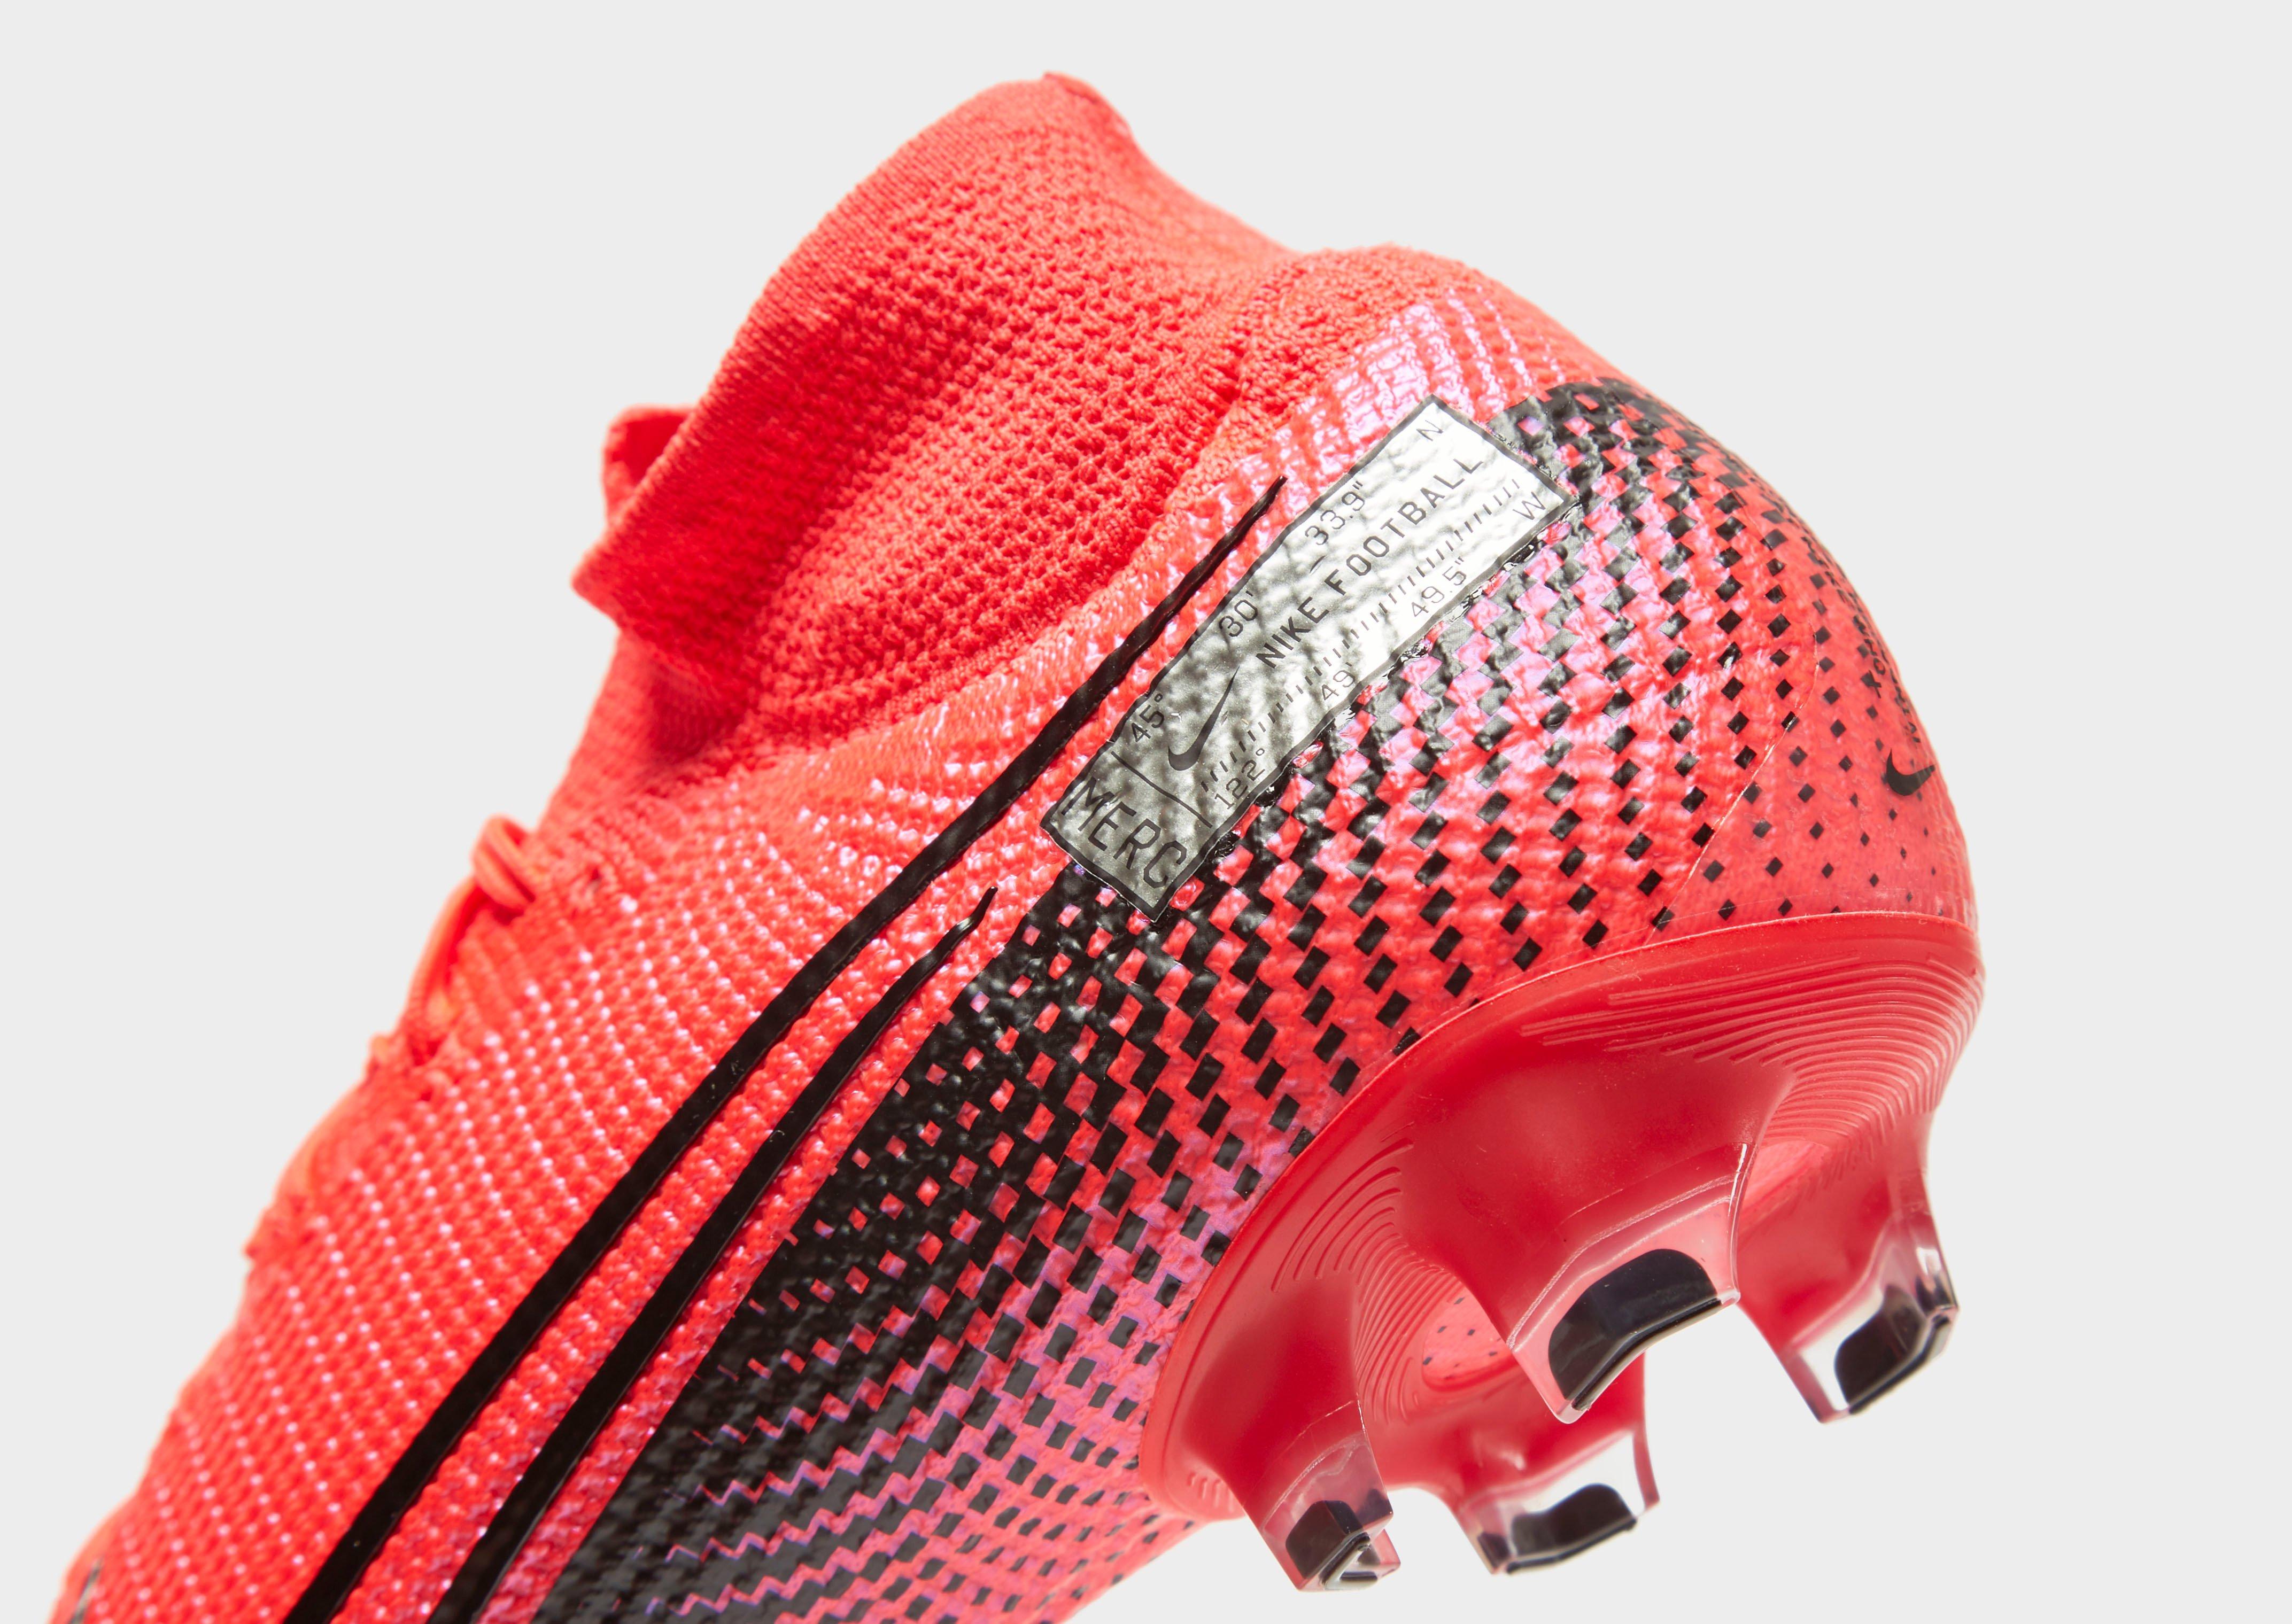 Nike Mercurial SuperflyX 6 Elite TF Level Up Superfly.